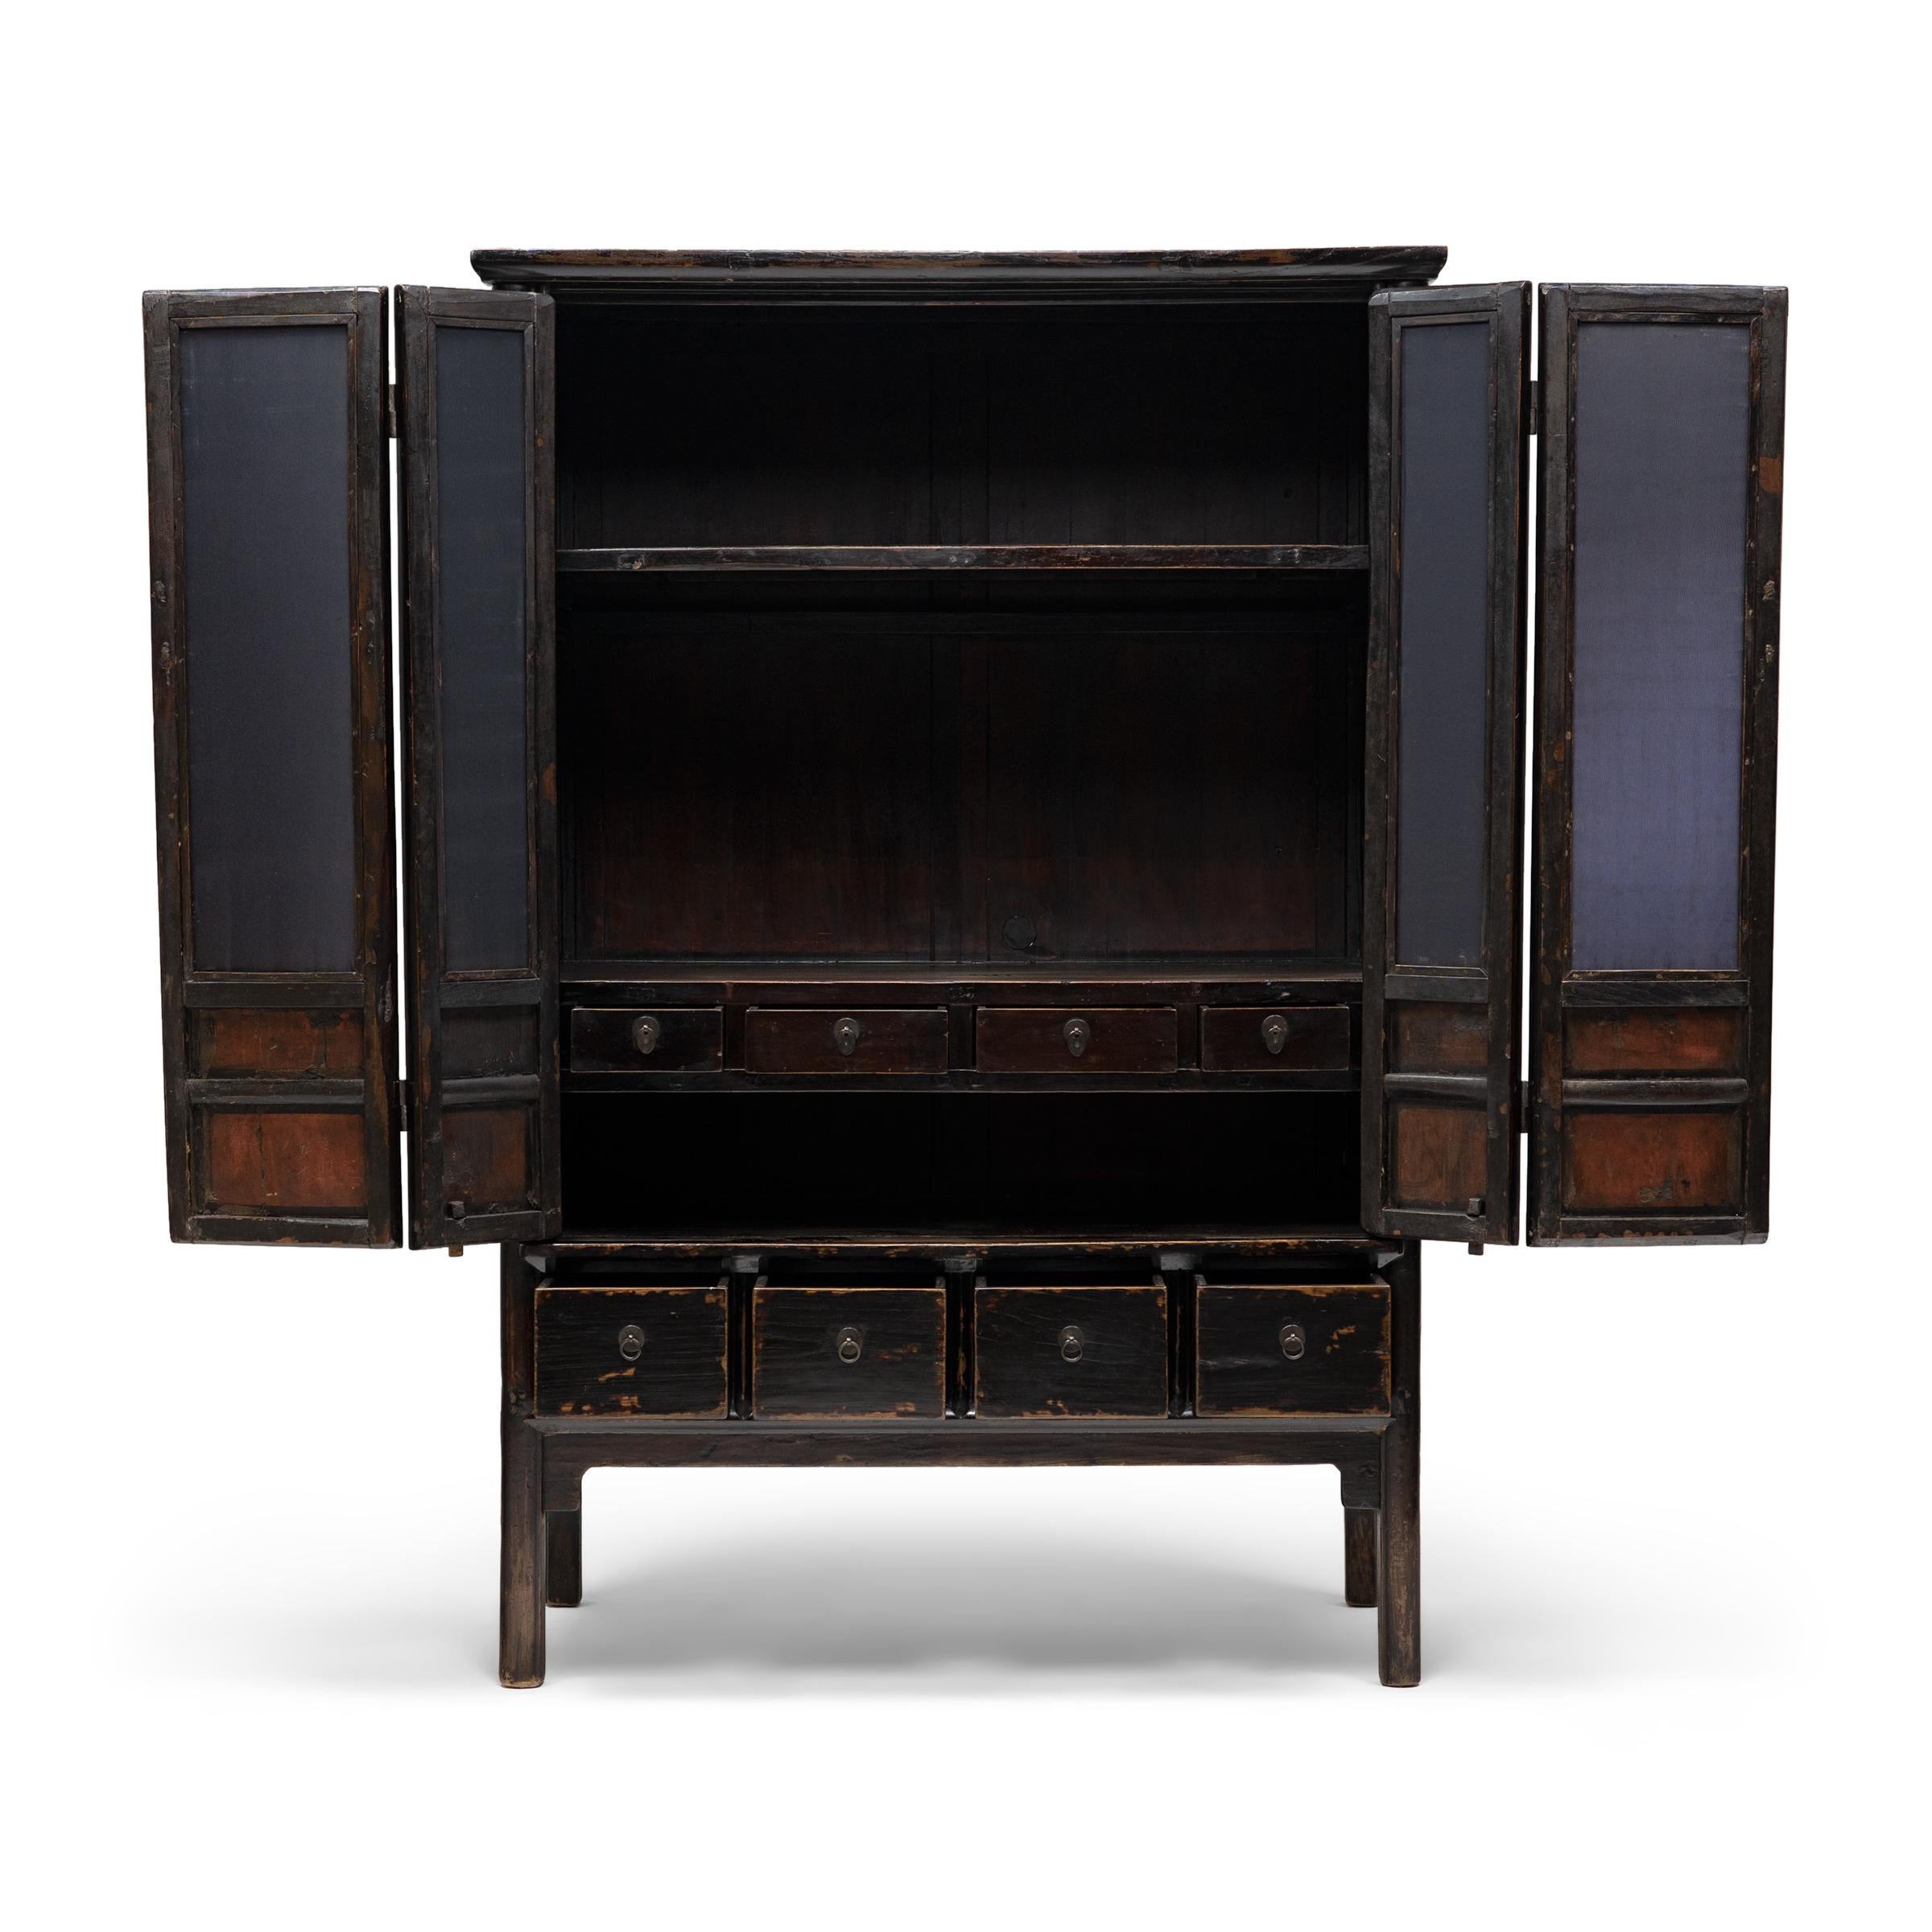 Qing Chinese Black Lacquer Lattice Cabinet, c. 1850